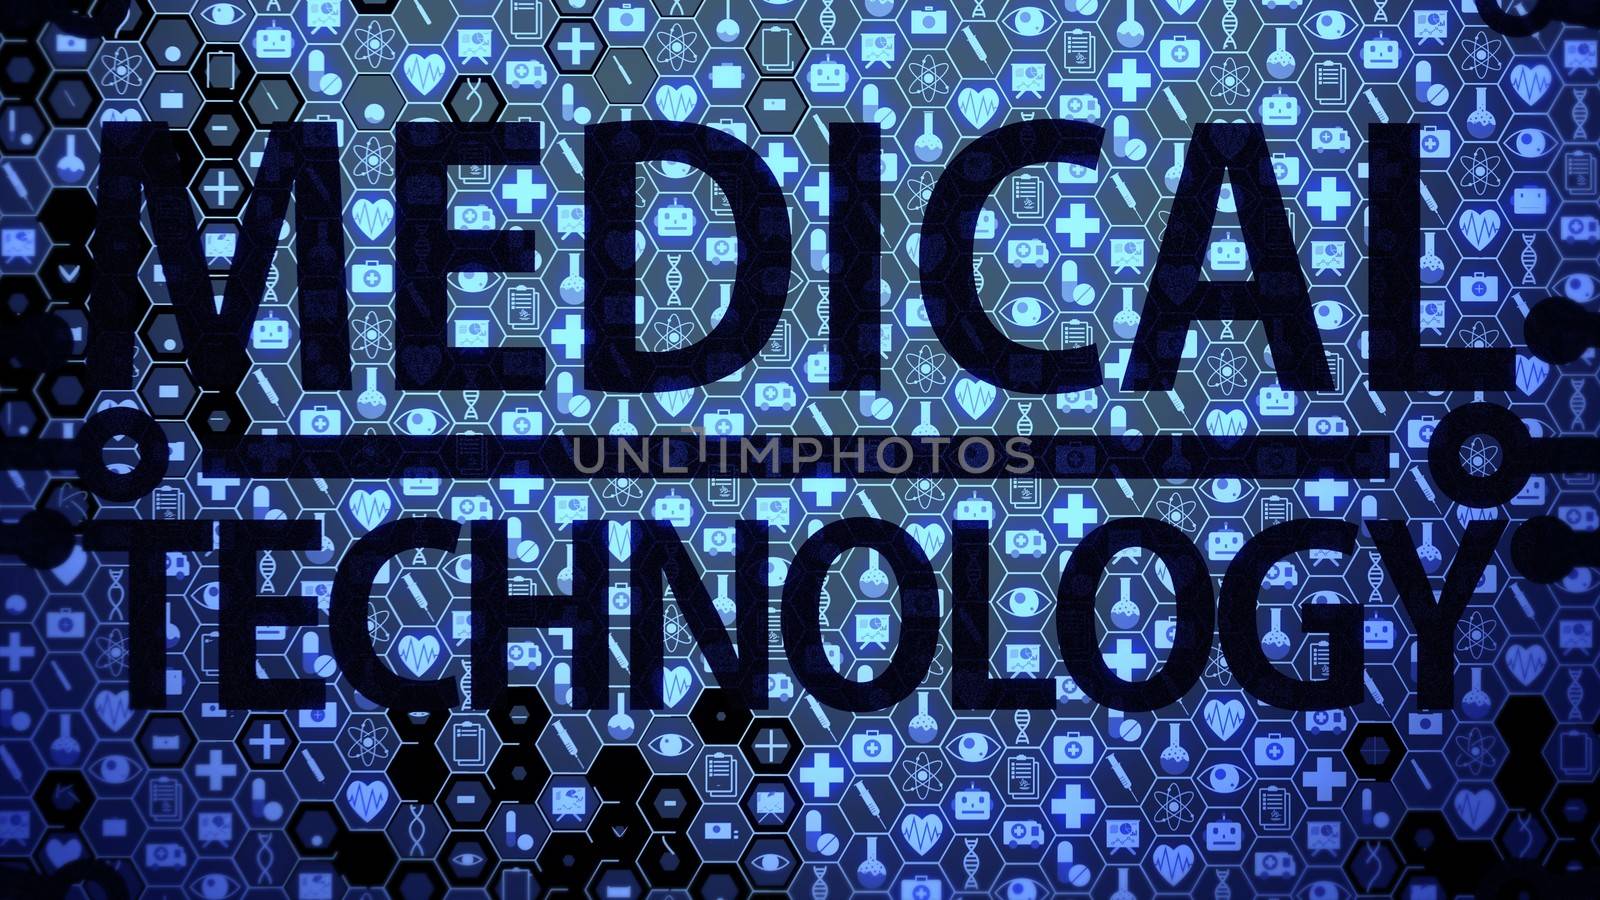 Medical Technology Big Picture Background HUD Composed of Icons Set with Blue Light Ver.2 of 4 by ariya23156